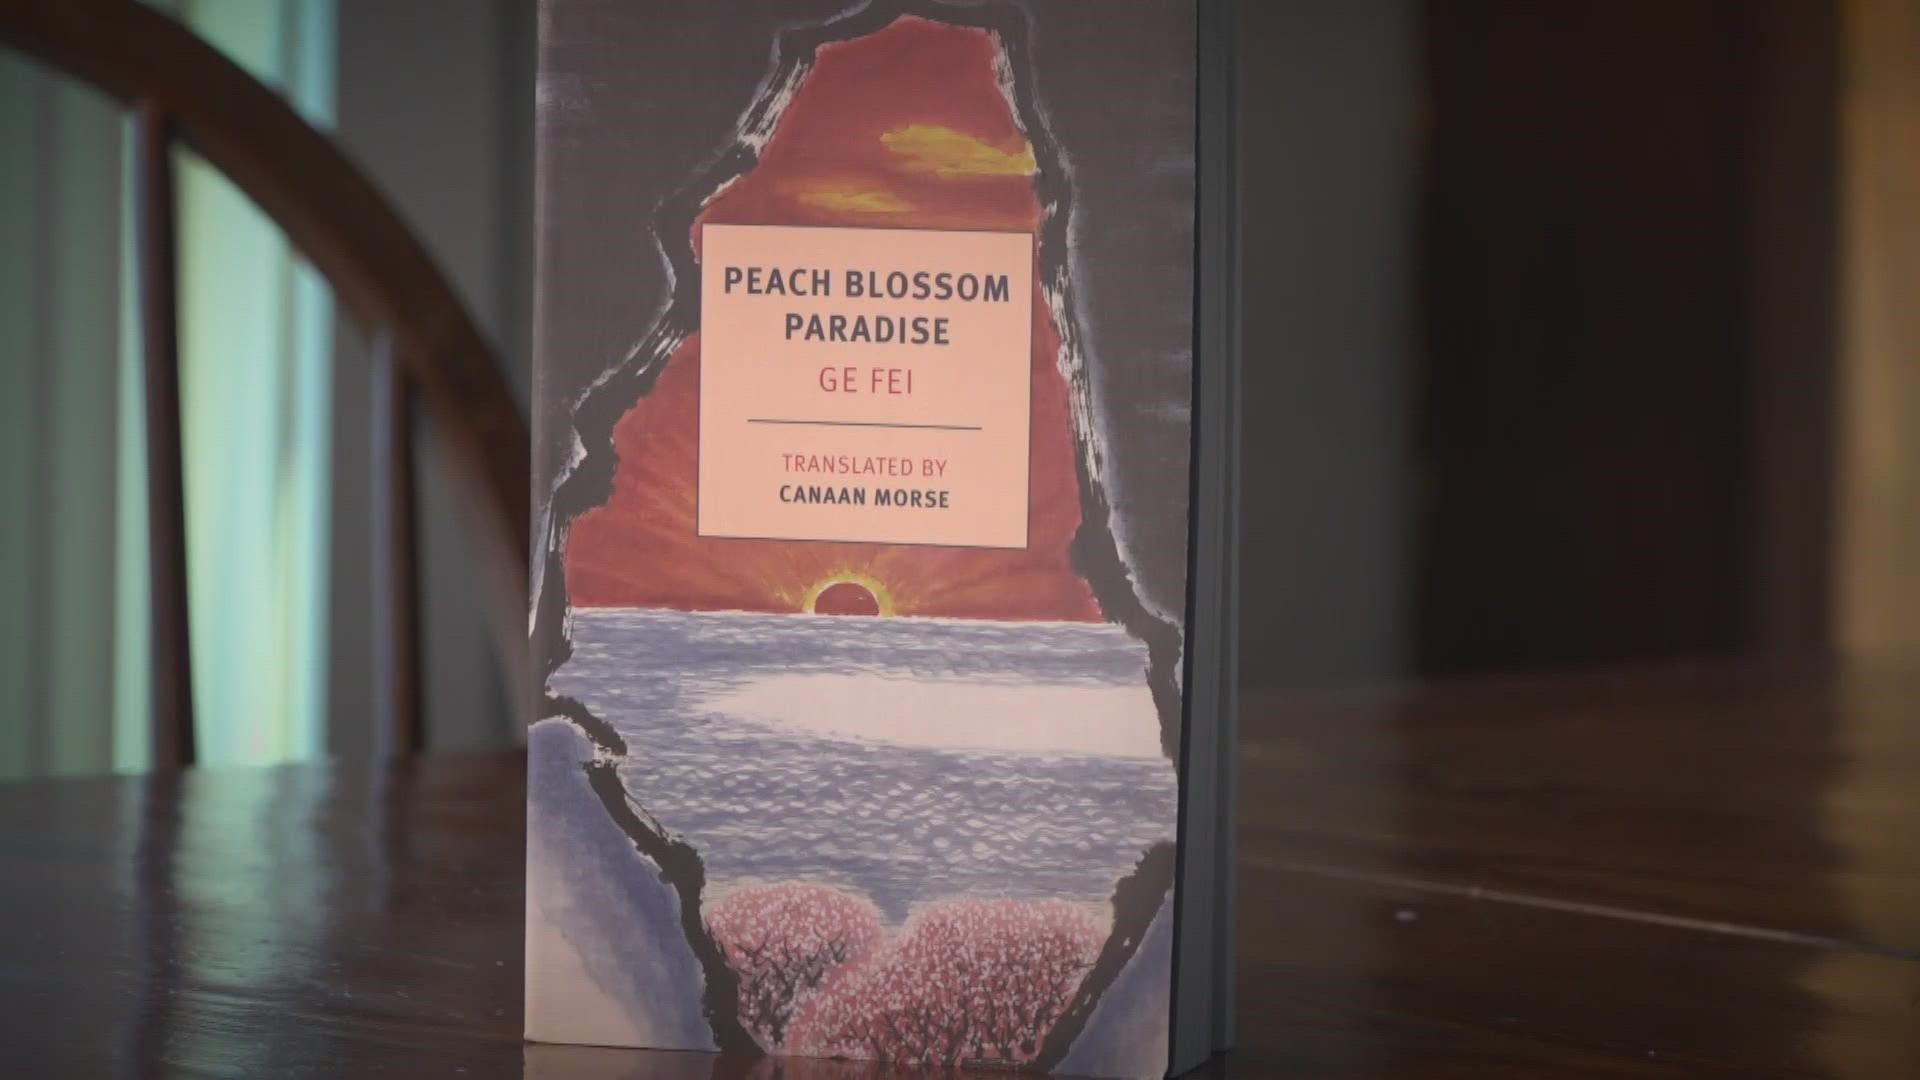 Canaan Morse's recent translation, from Chinese to English, of Peach Blossom Paradise, was named a National Book Award Finalist for Translated Literature.